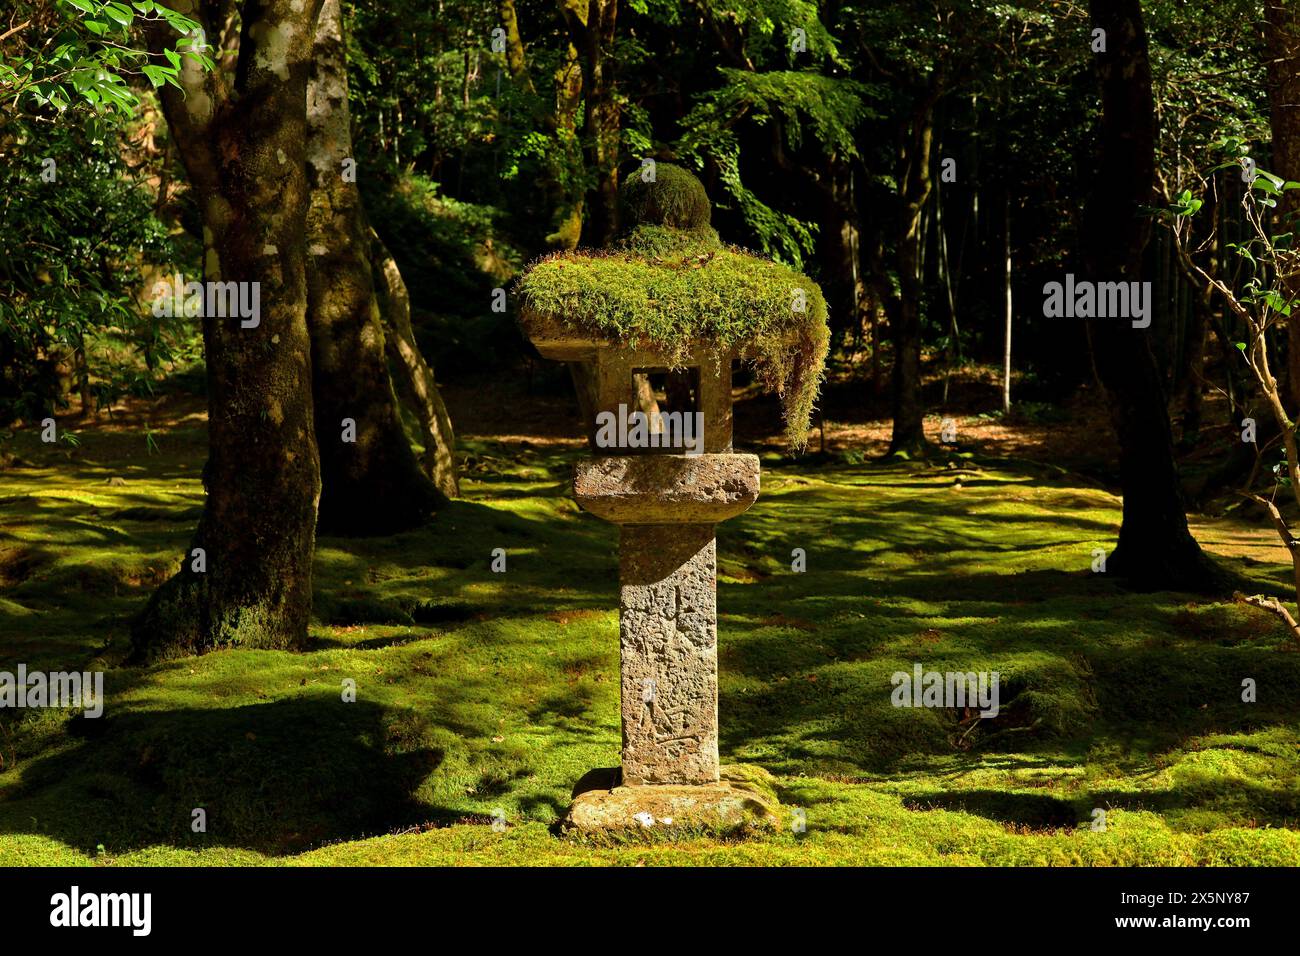 An old stone lantern placed in a moss-covered Japanese garden Stock Photo